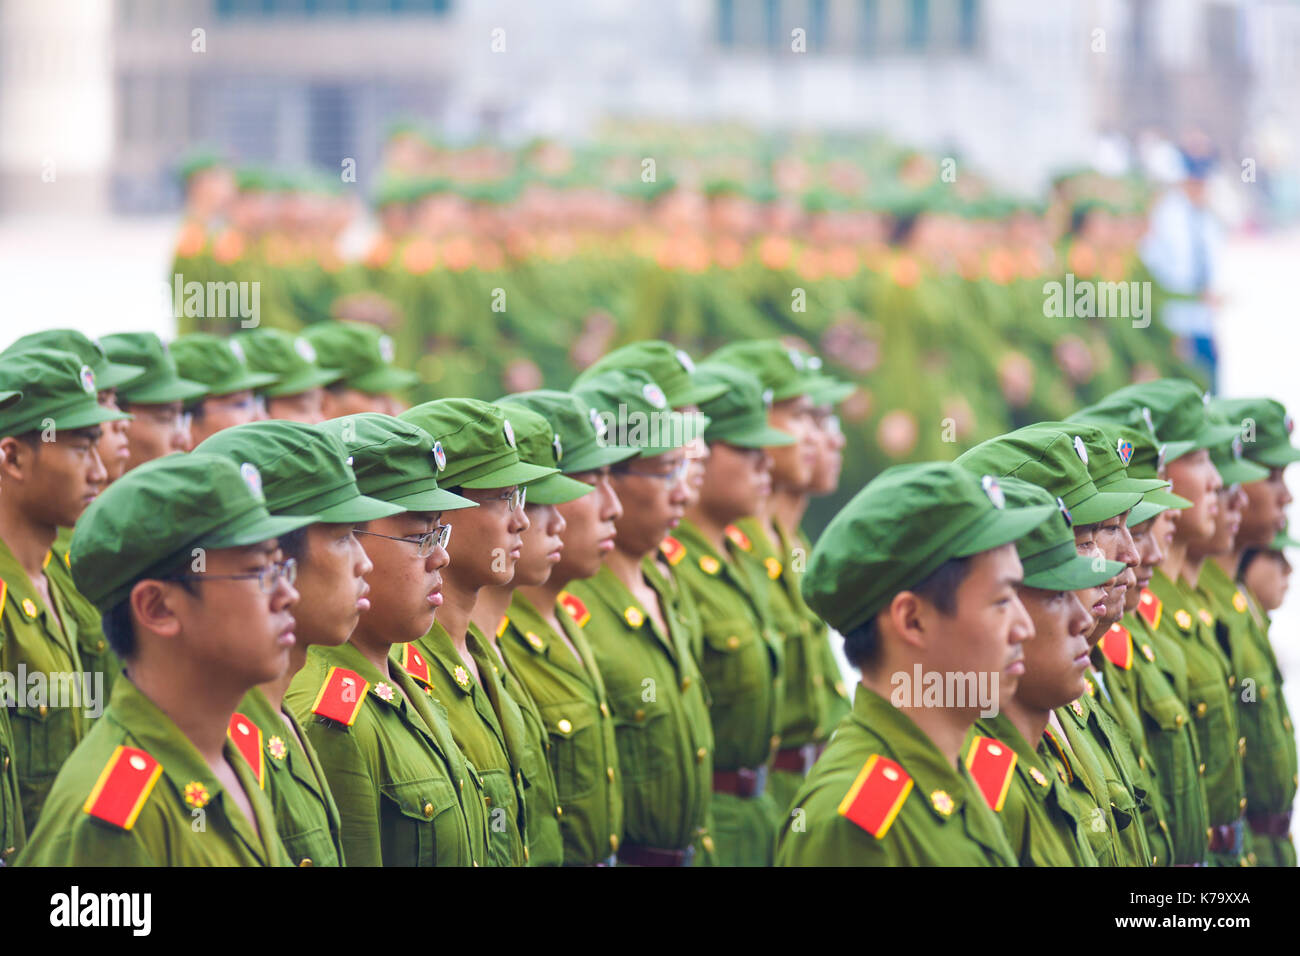 Changsha, China - September 5, 2007: Rows of male Chinese university students in communist green uniforms line up in formation for compulsory military Stock Photo